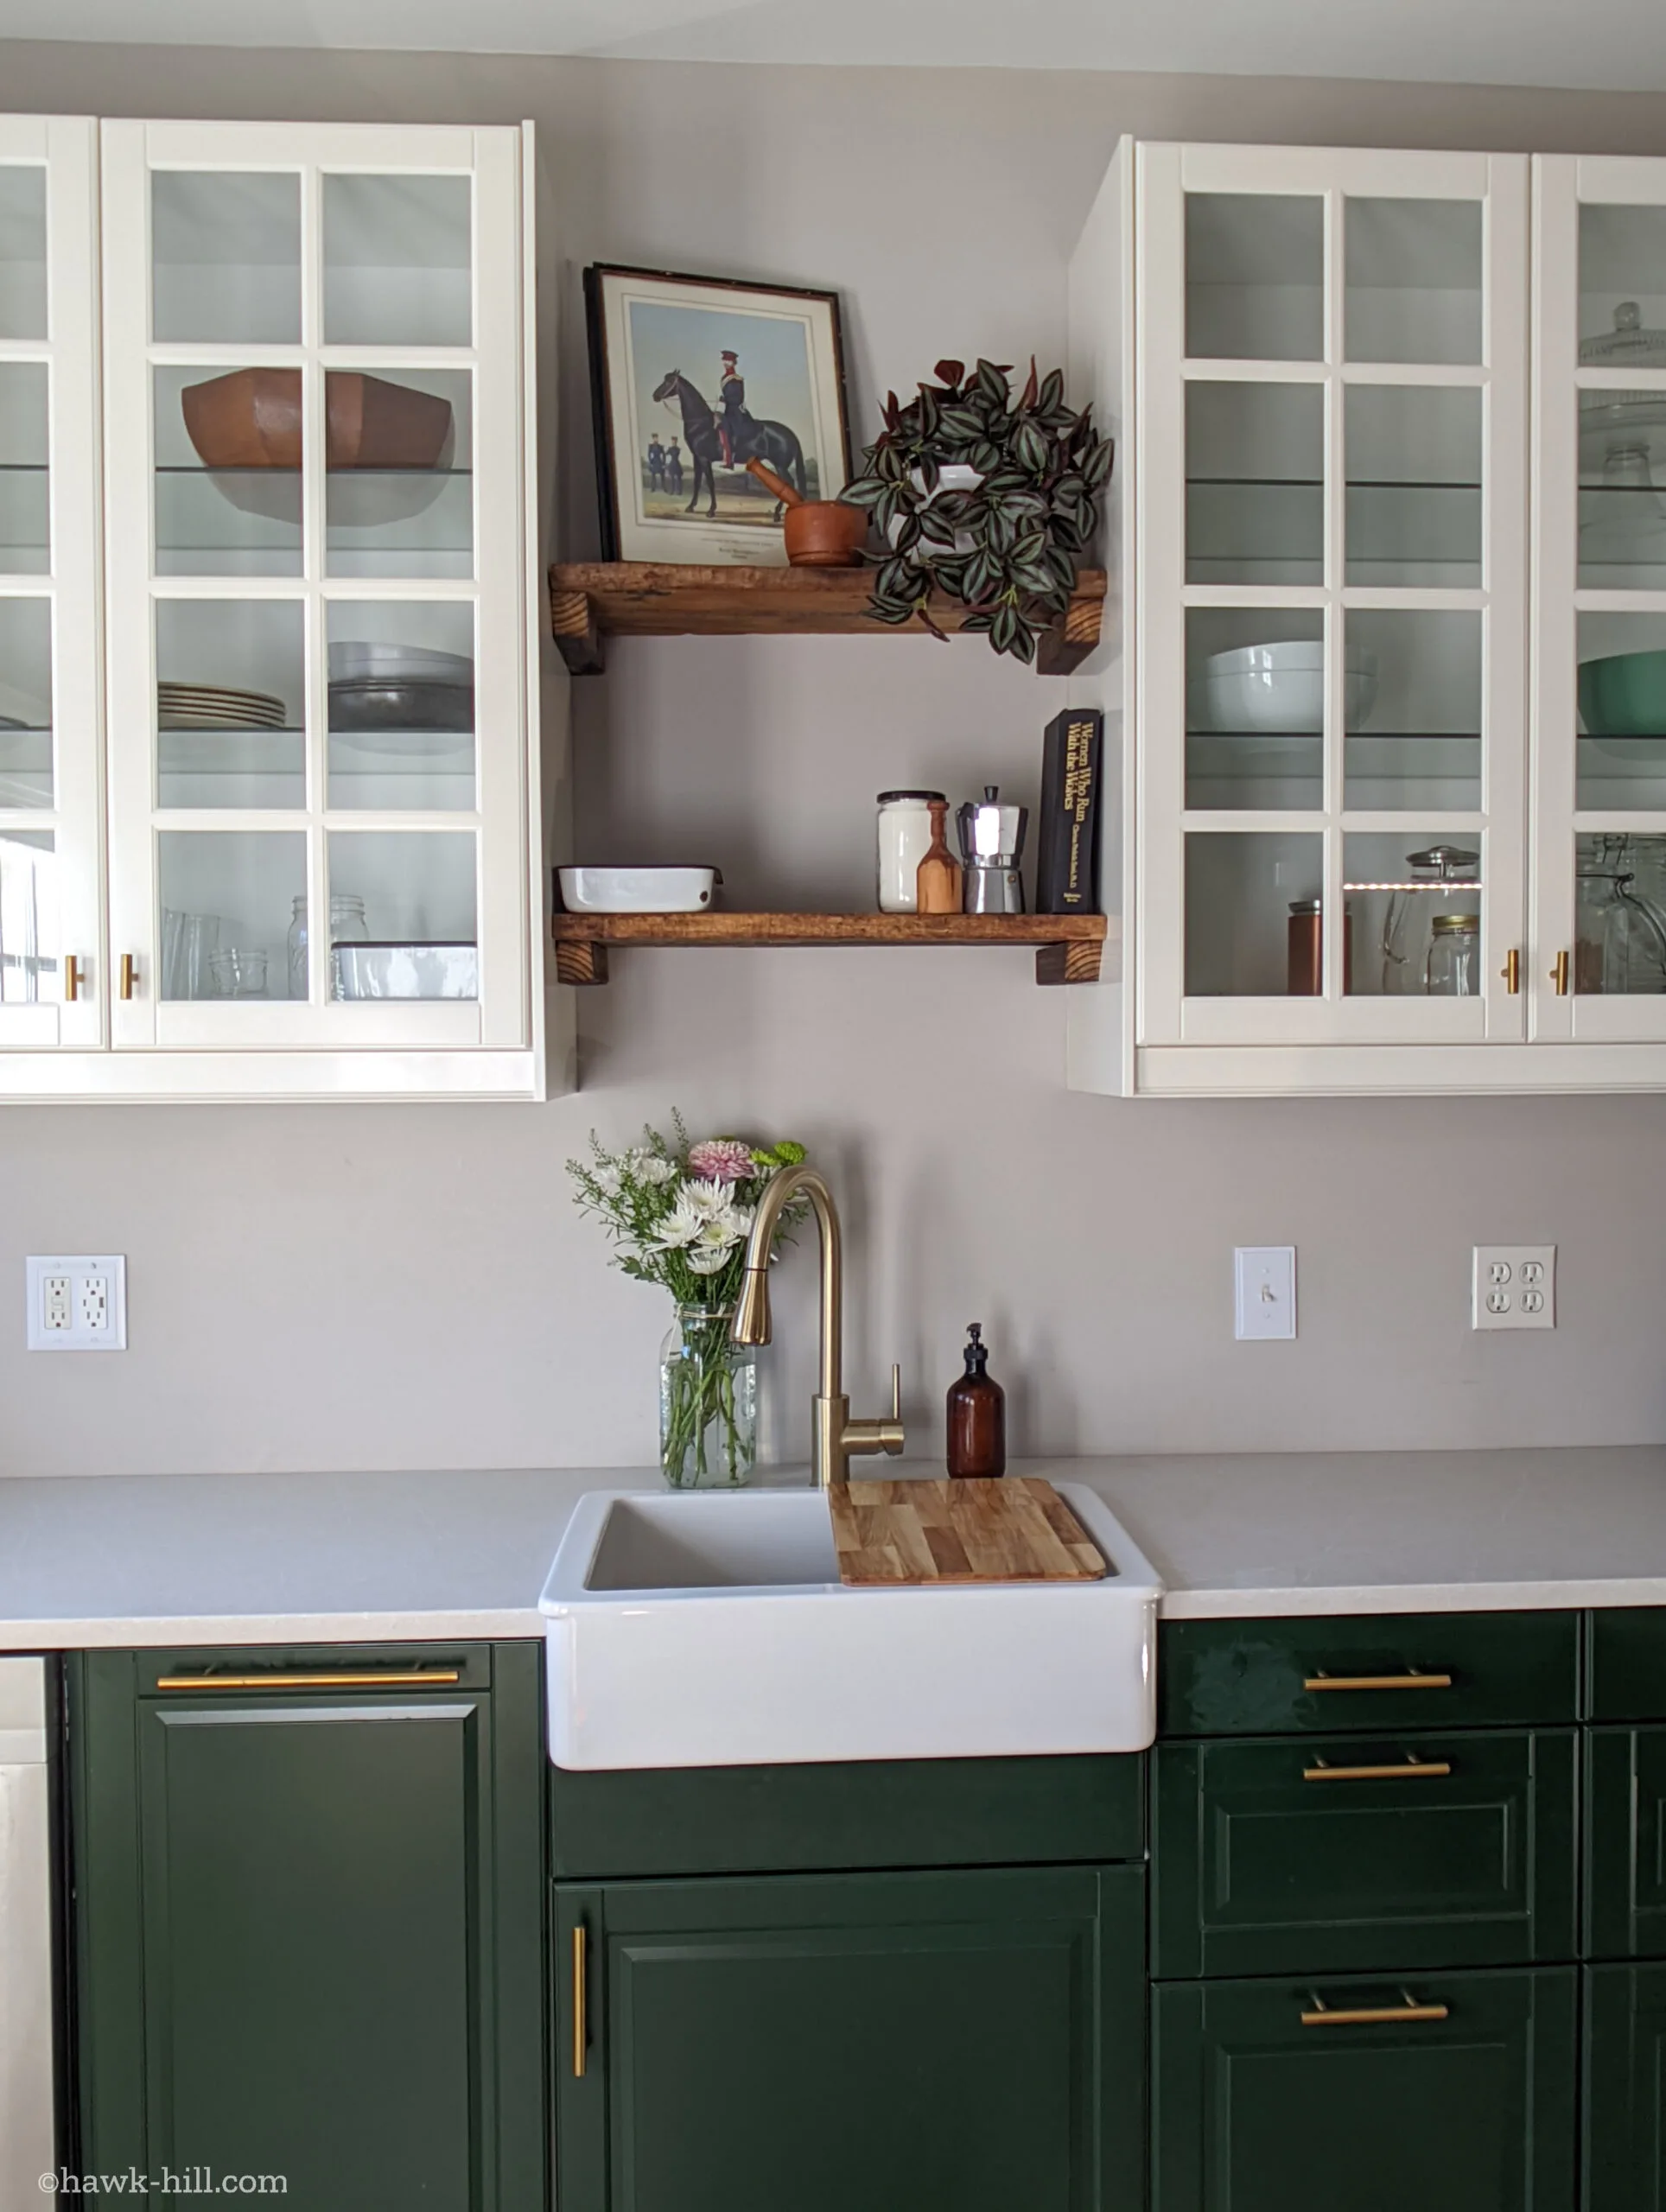 A green, white, and gray kitchen with natural wood open shelves.